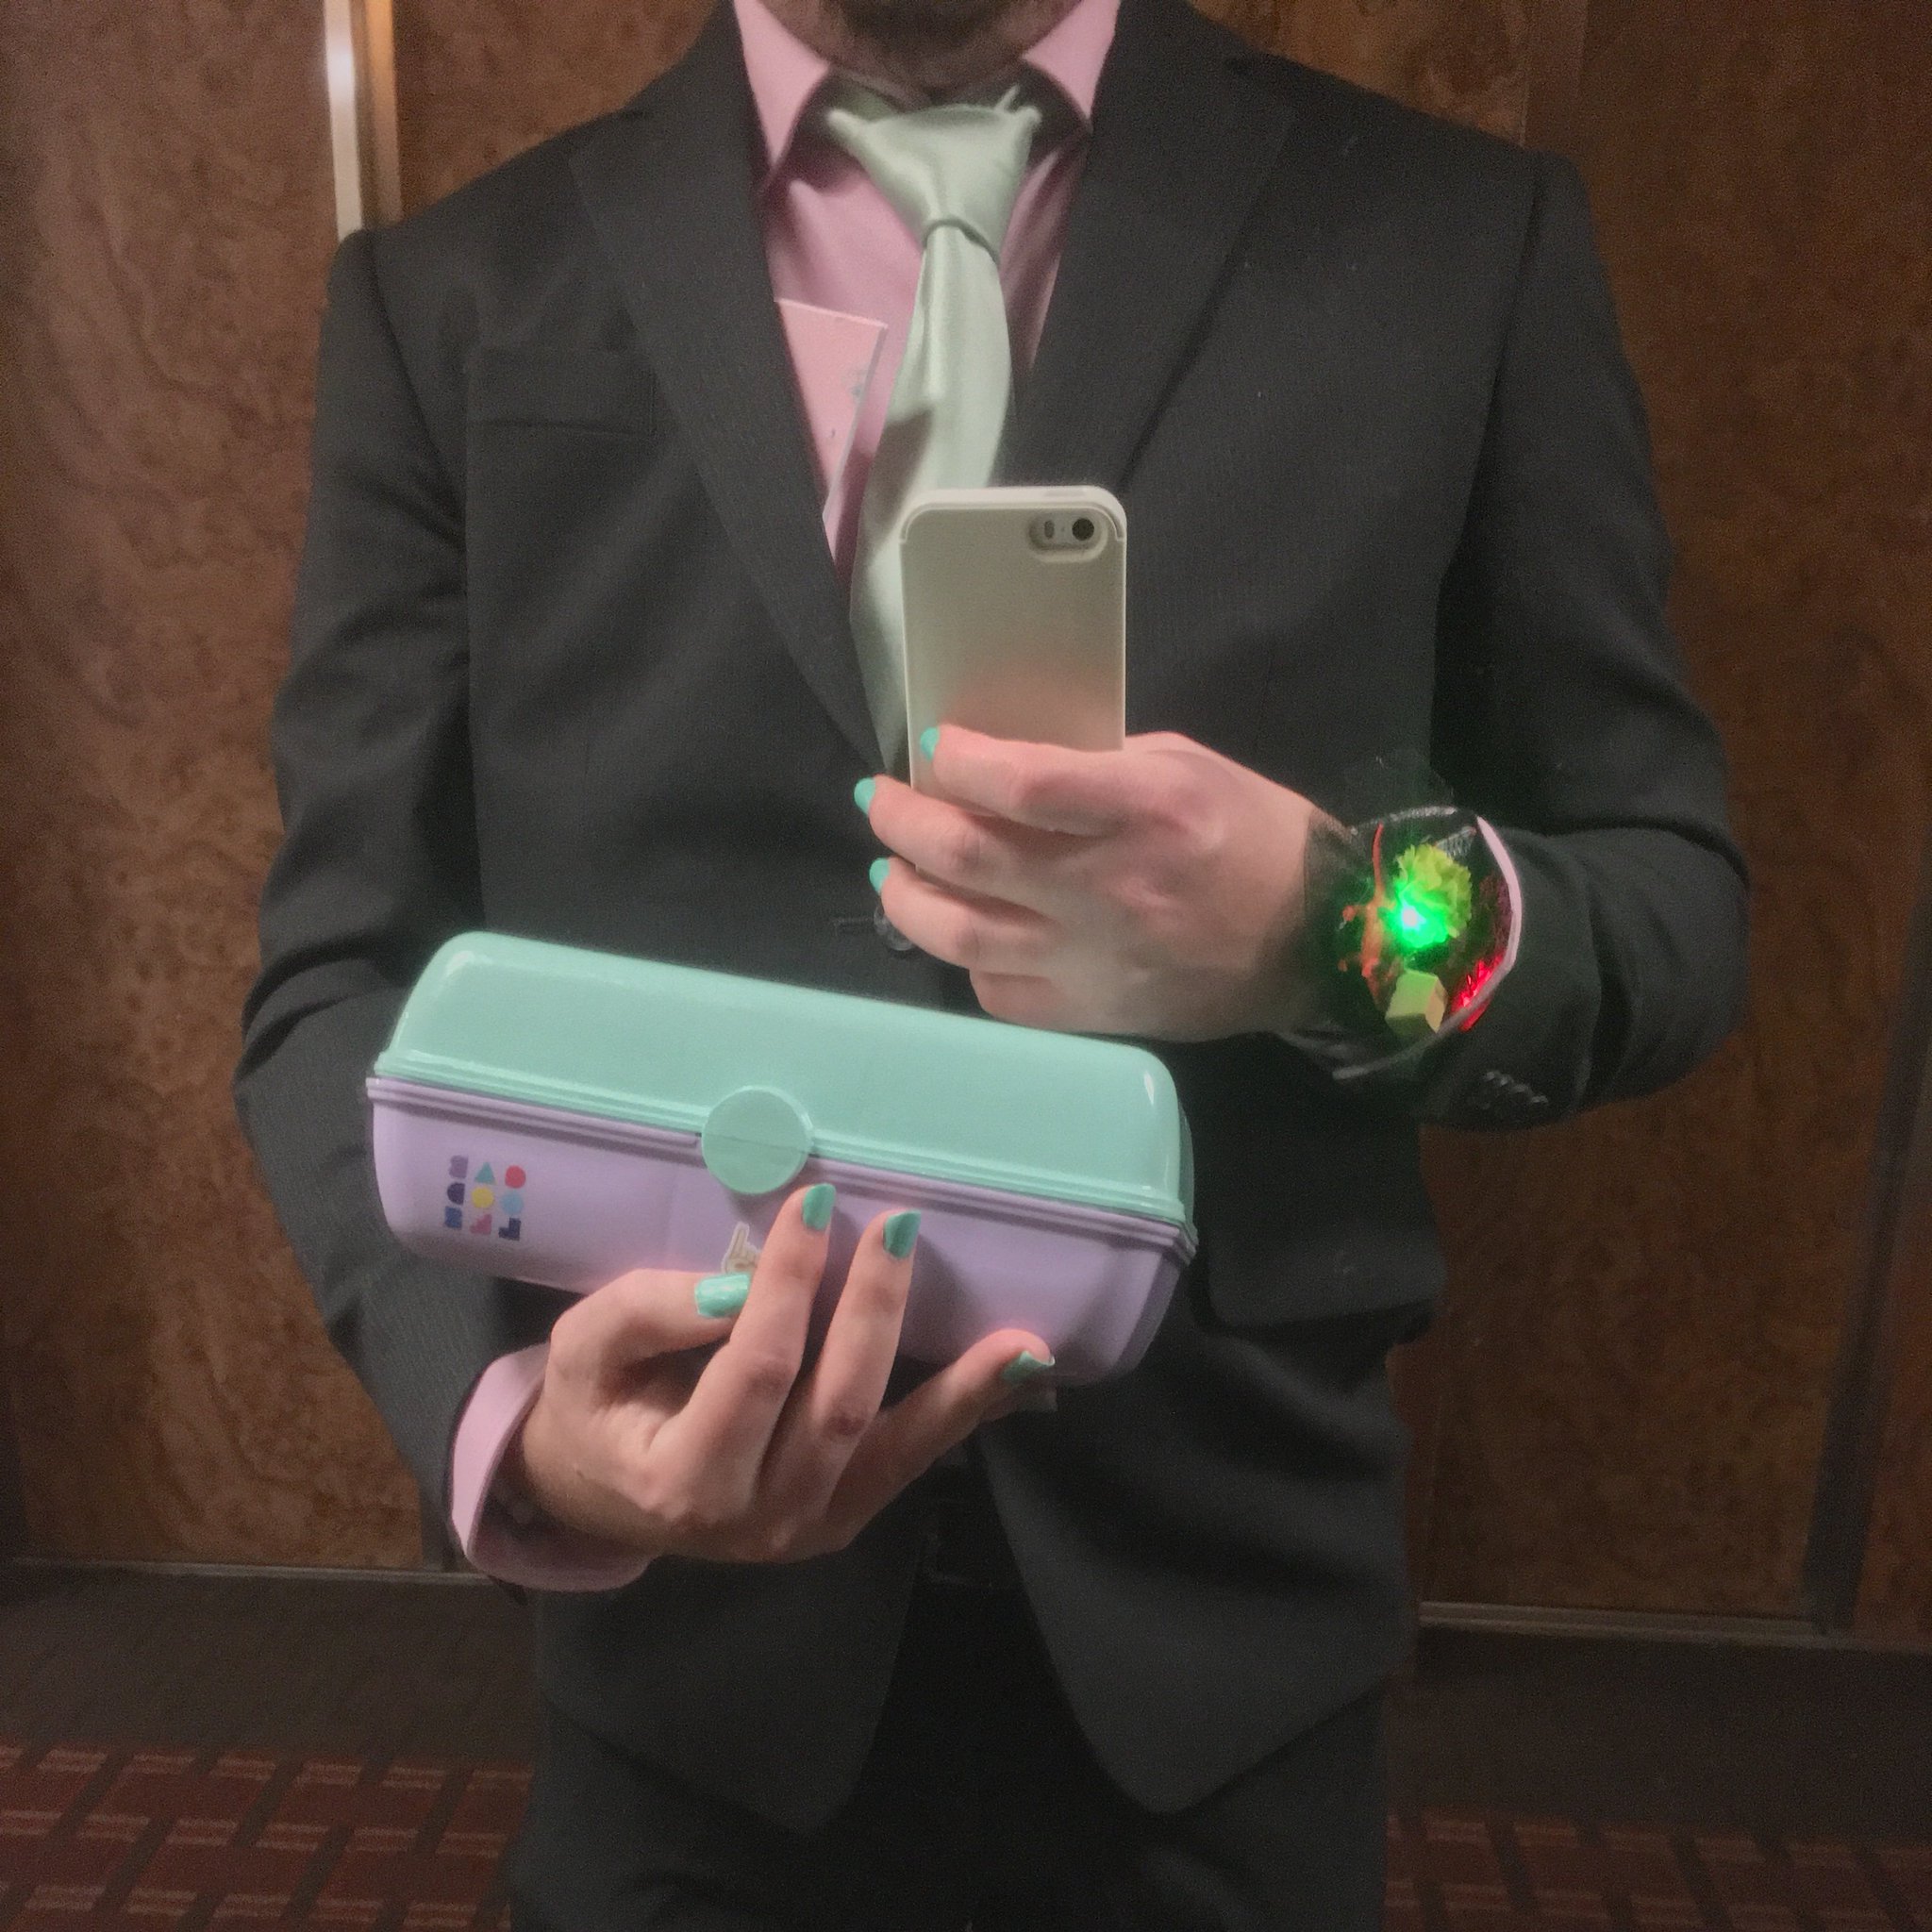 L.A. Colors “Sea Life”, matching my tie and contrasting with a pastel-purple dress shirt.